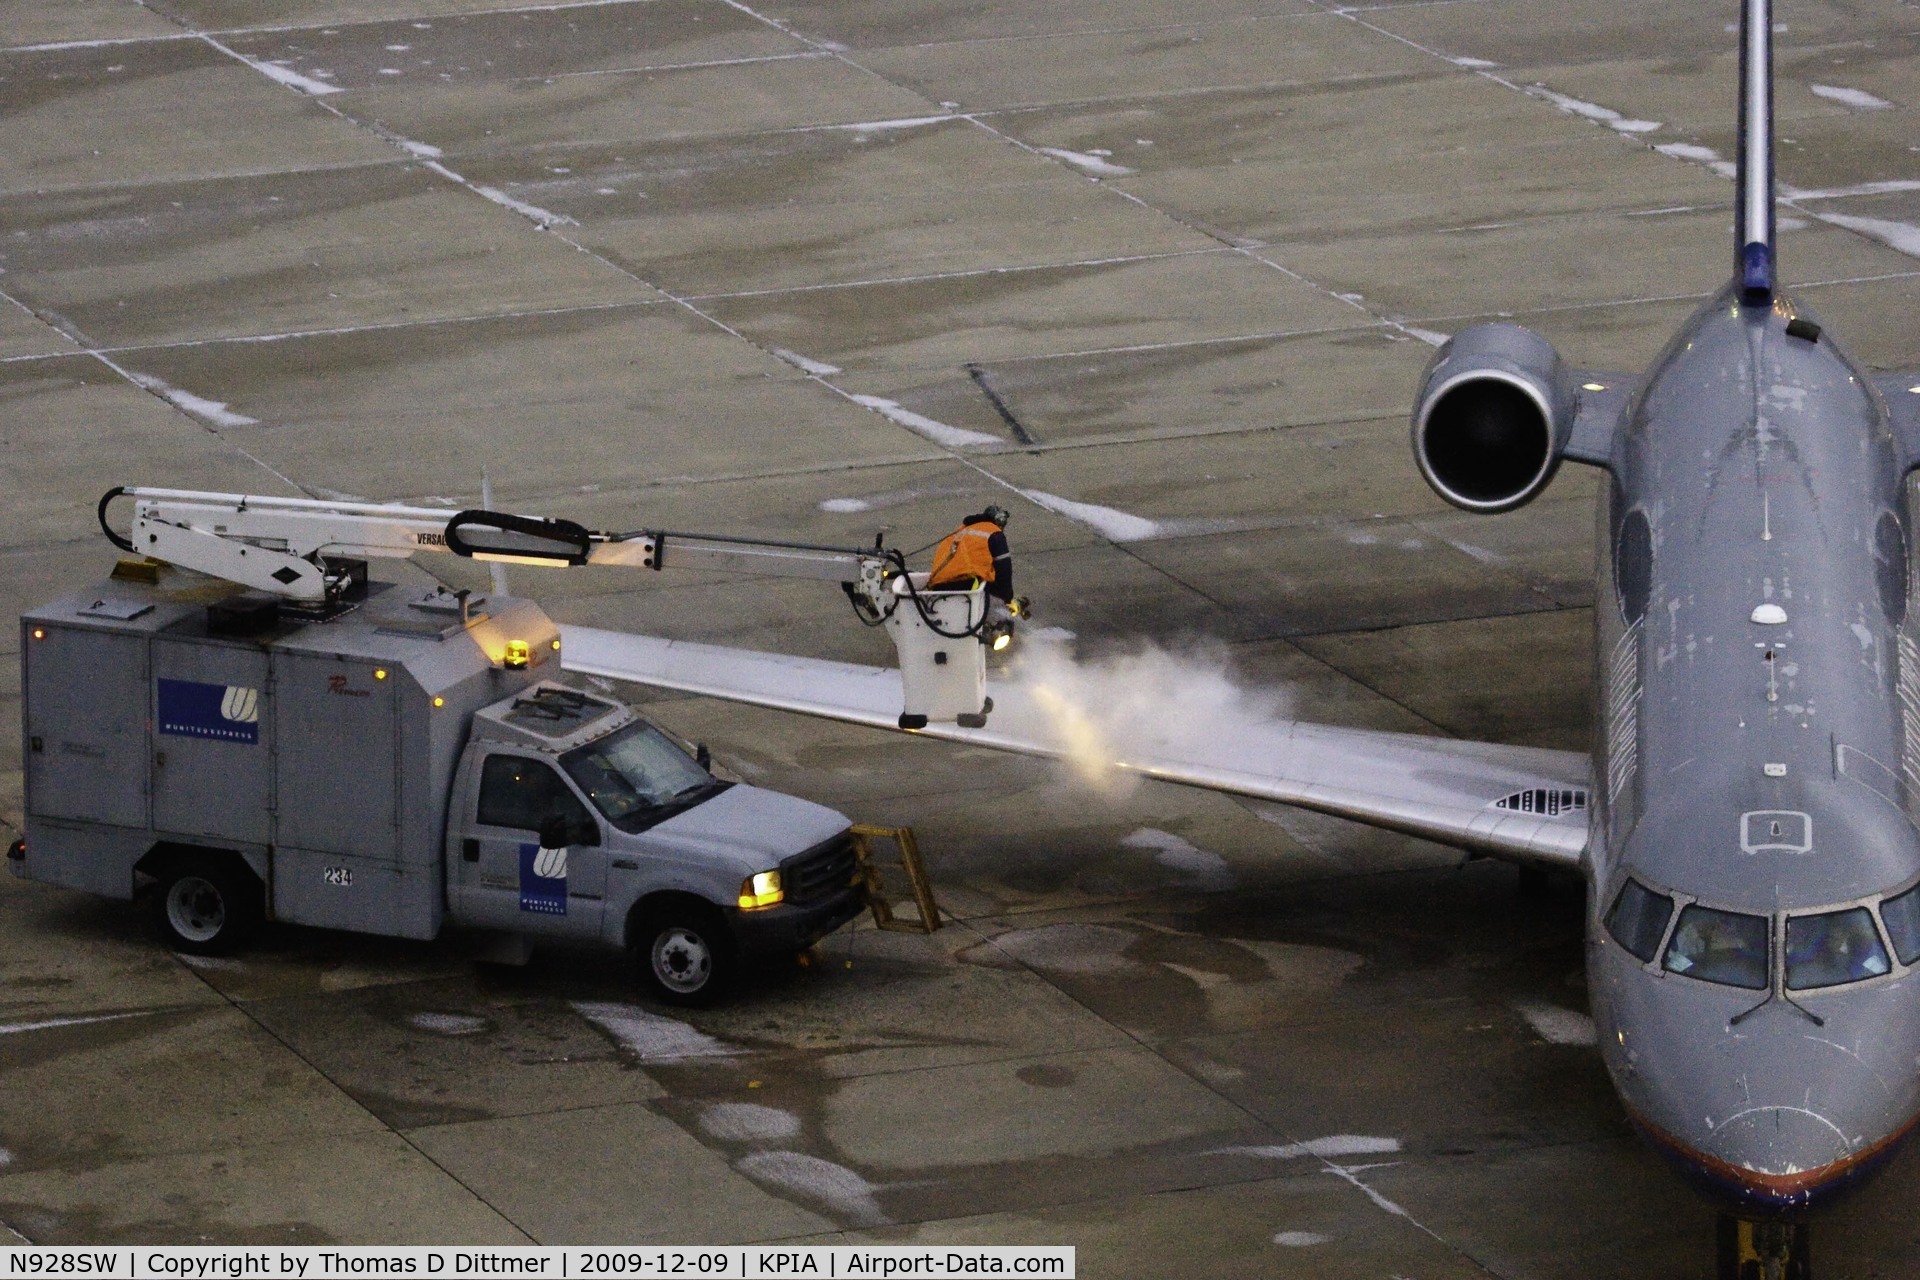 N928SW, 2002 Bombardier CRJ-200LR (CL-600-2B19) C/N 7701, United Express (N928SW) is nearly finished with de-icing